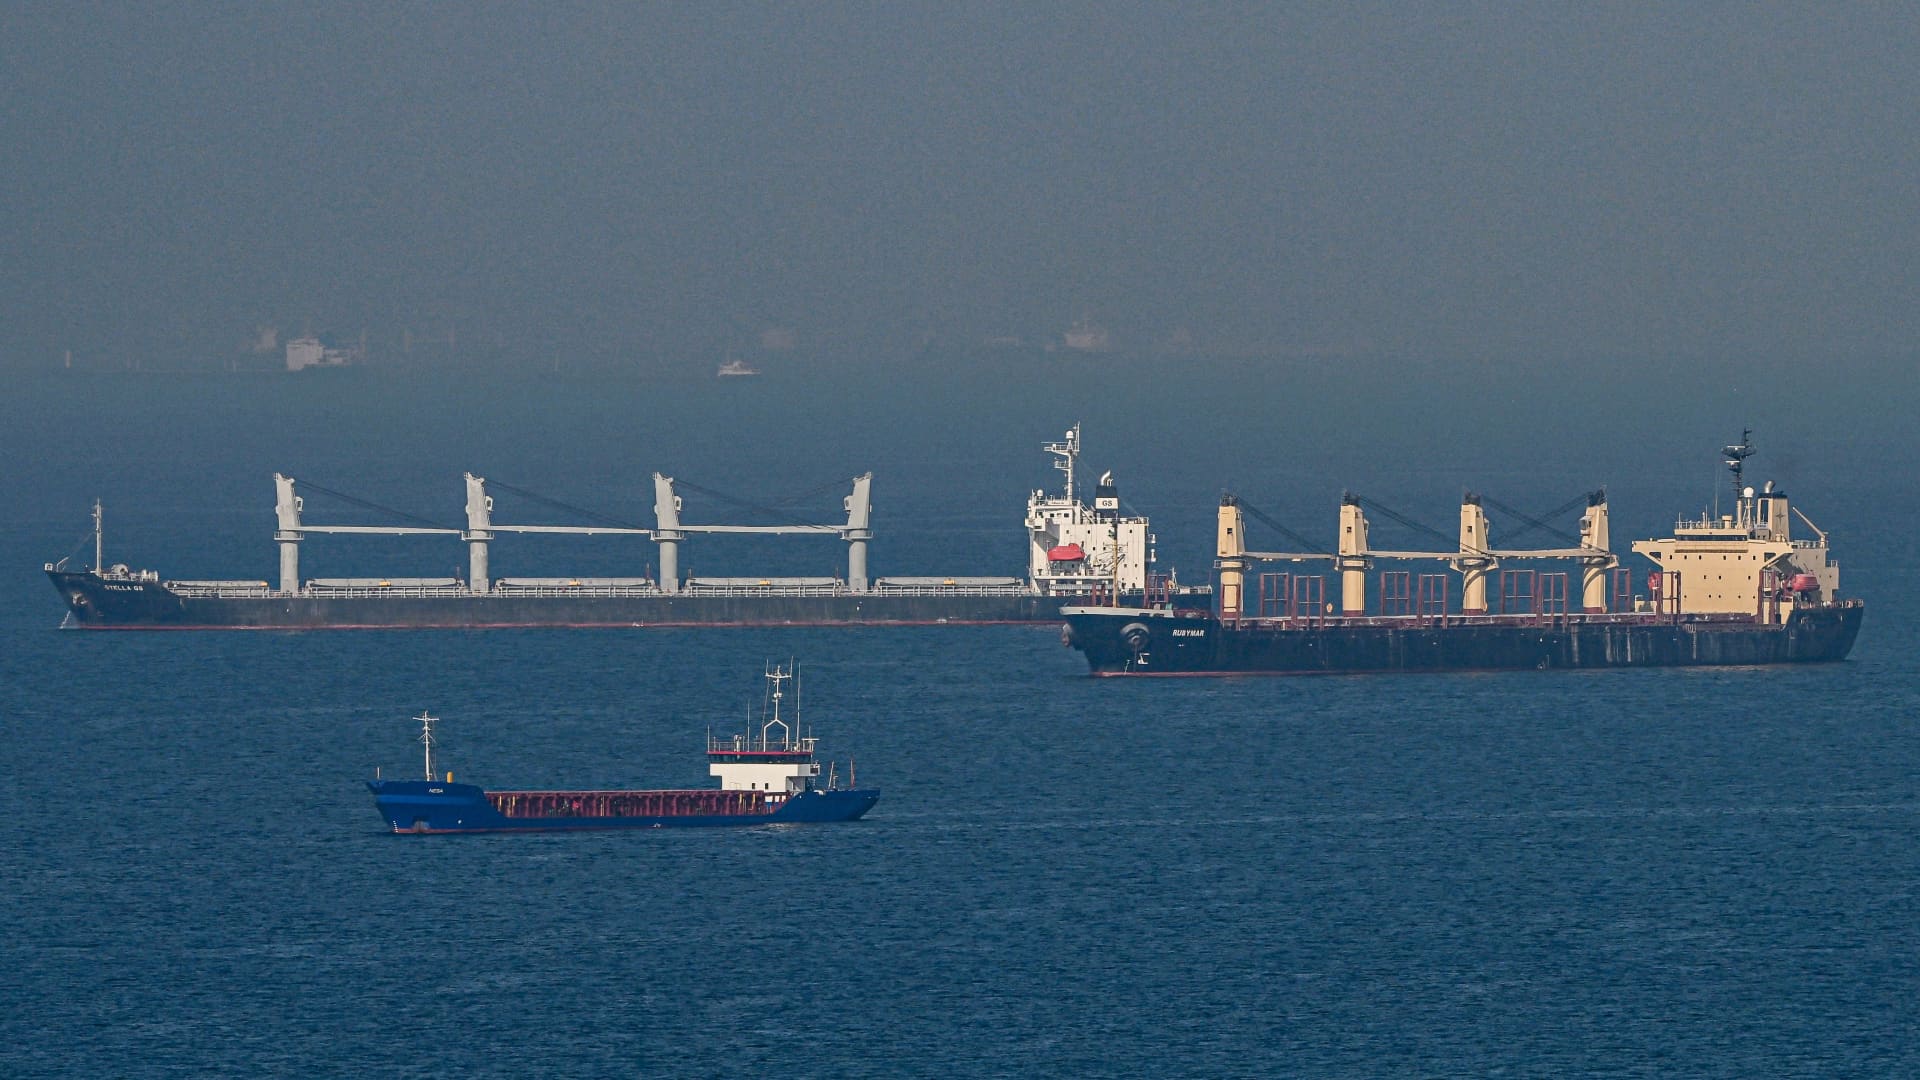 Cargo ship Rubymar (R), carrying Ukrainian grain, and cargo ship Stella GS (L) originating from Ukraine, sail at the entrance of Bosphorus, in the Black Sea off the coast off Kumkoy, north of Istanbul, on November 2, 2022.